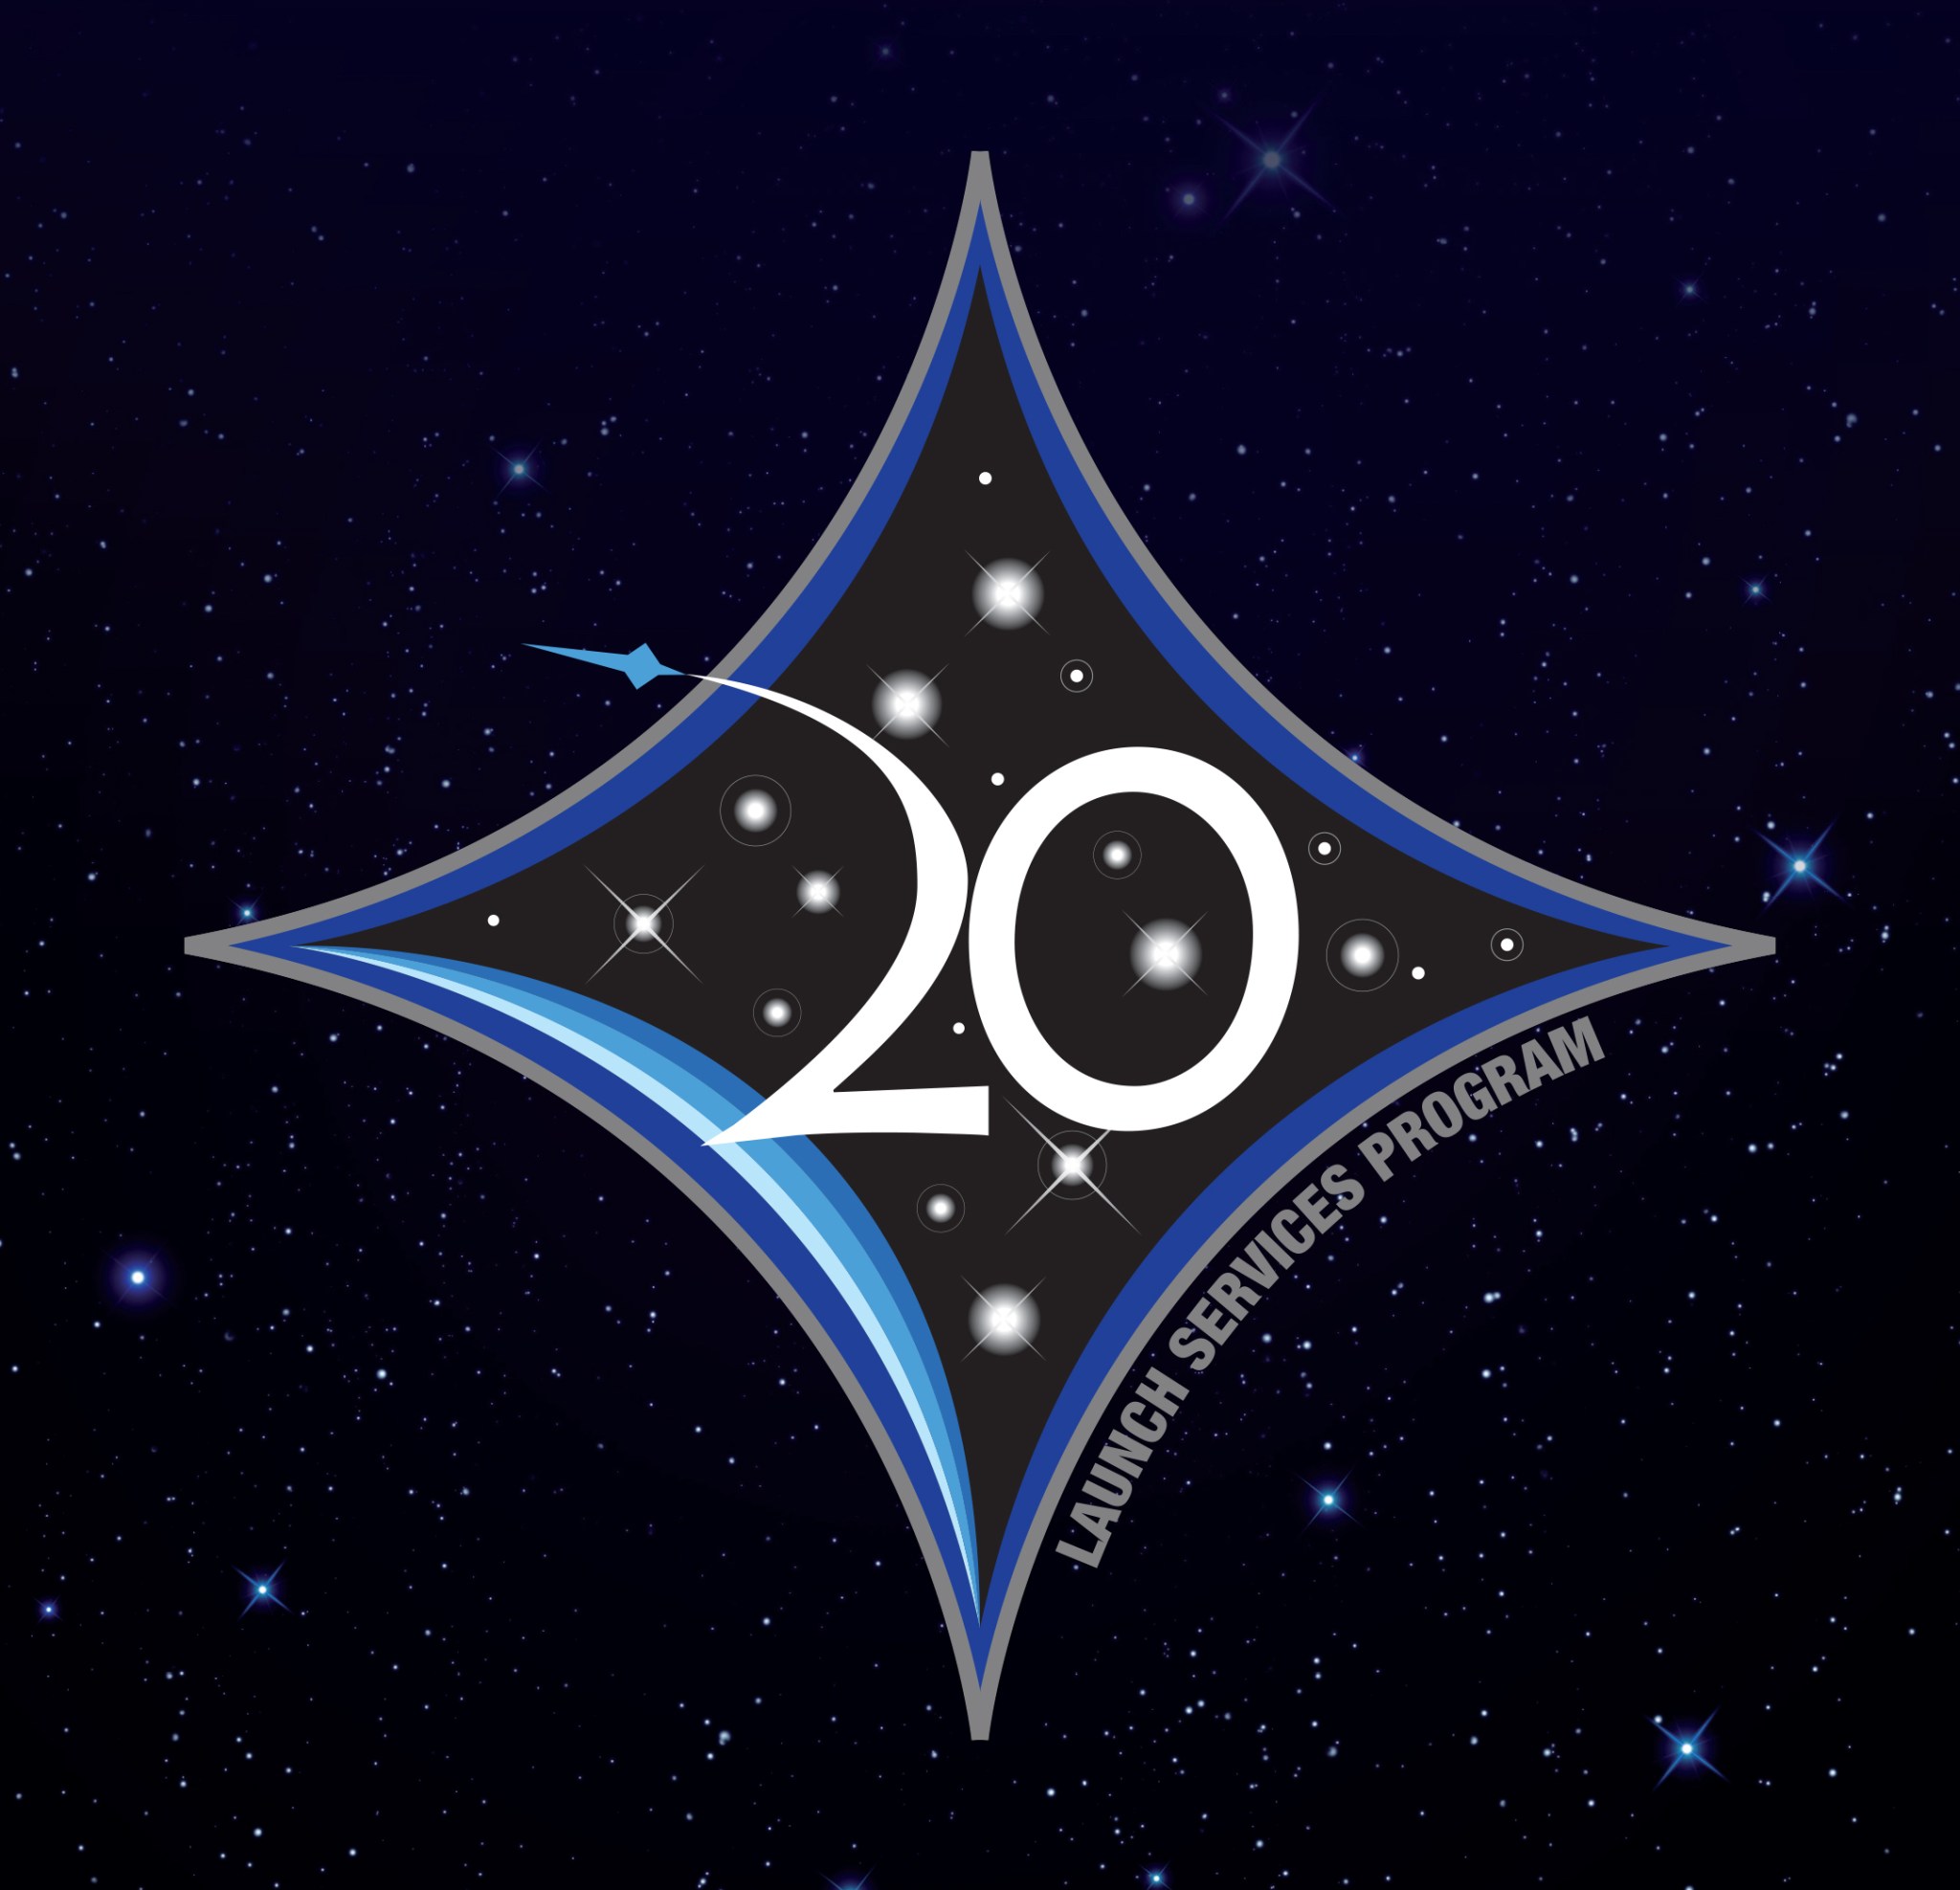 NASA's Launch Services Program 20th anniversary logo with starry background.